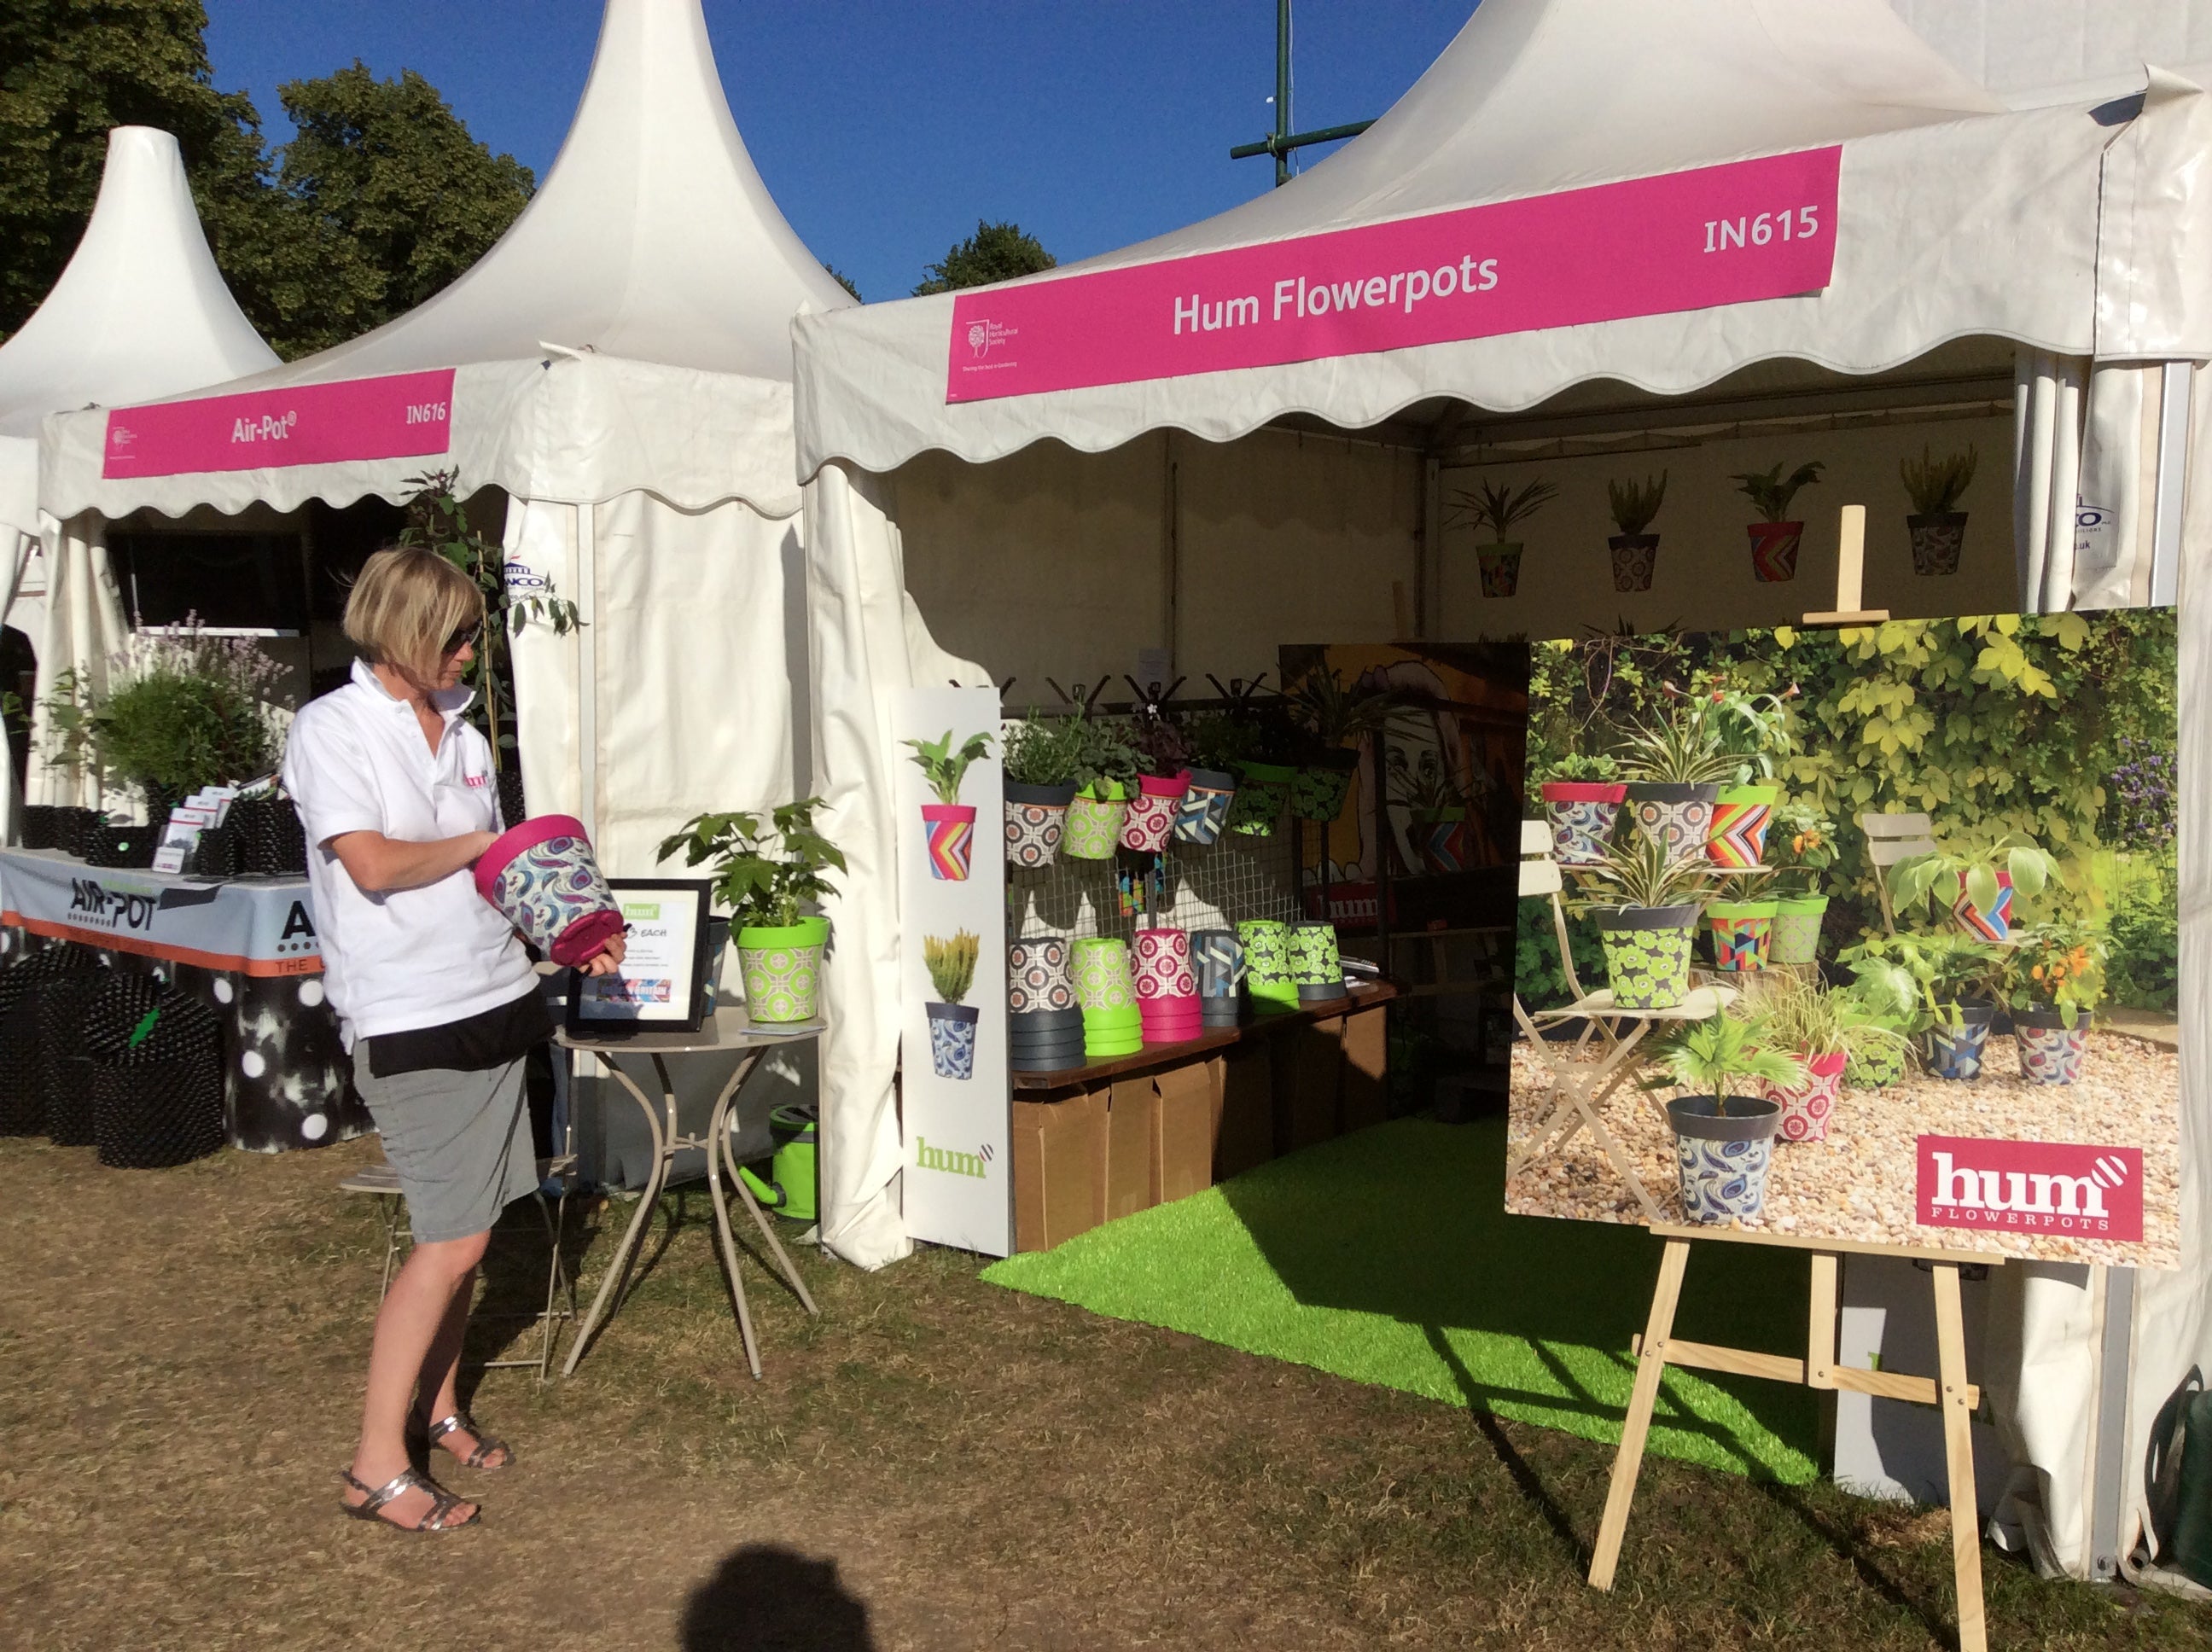 The Hum Flowerpots stand at the Hampton Court Flower Show 2015